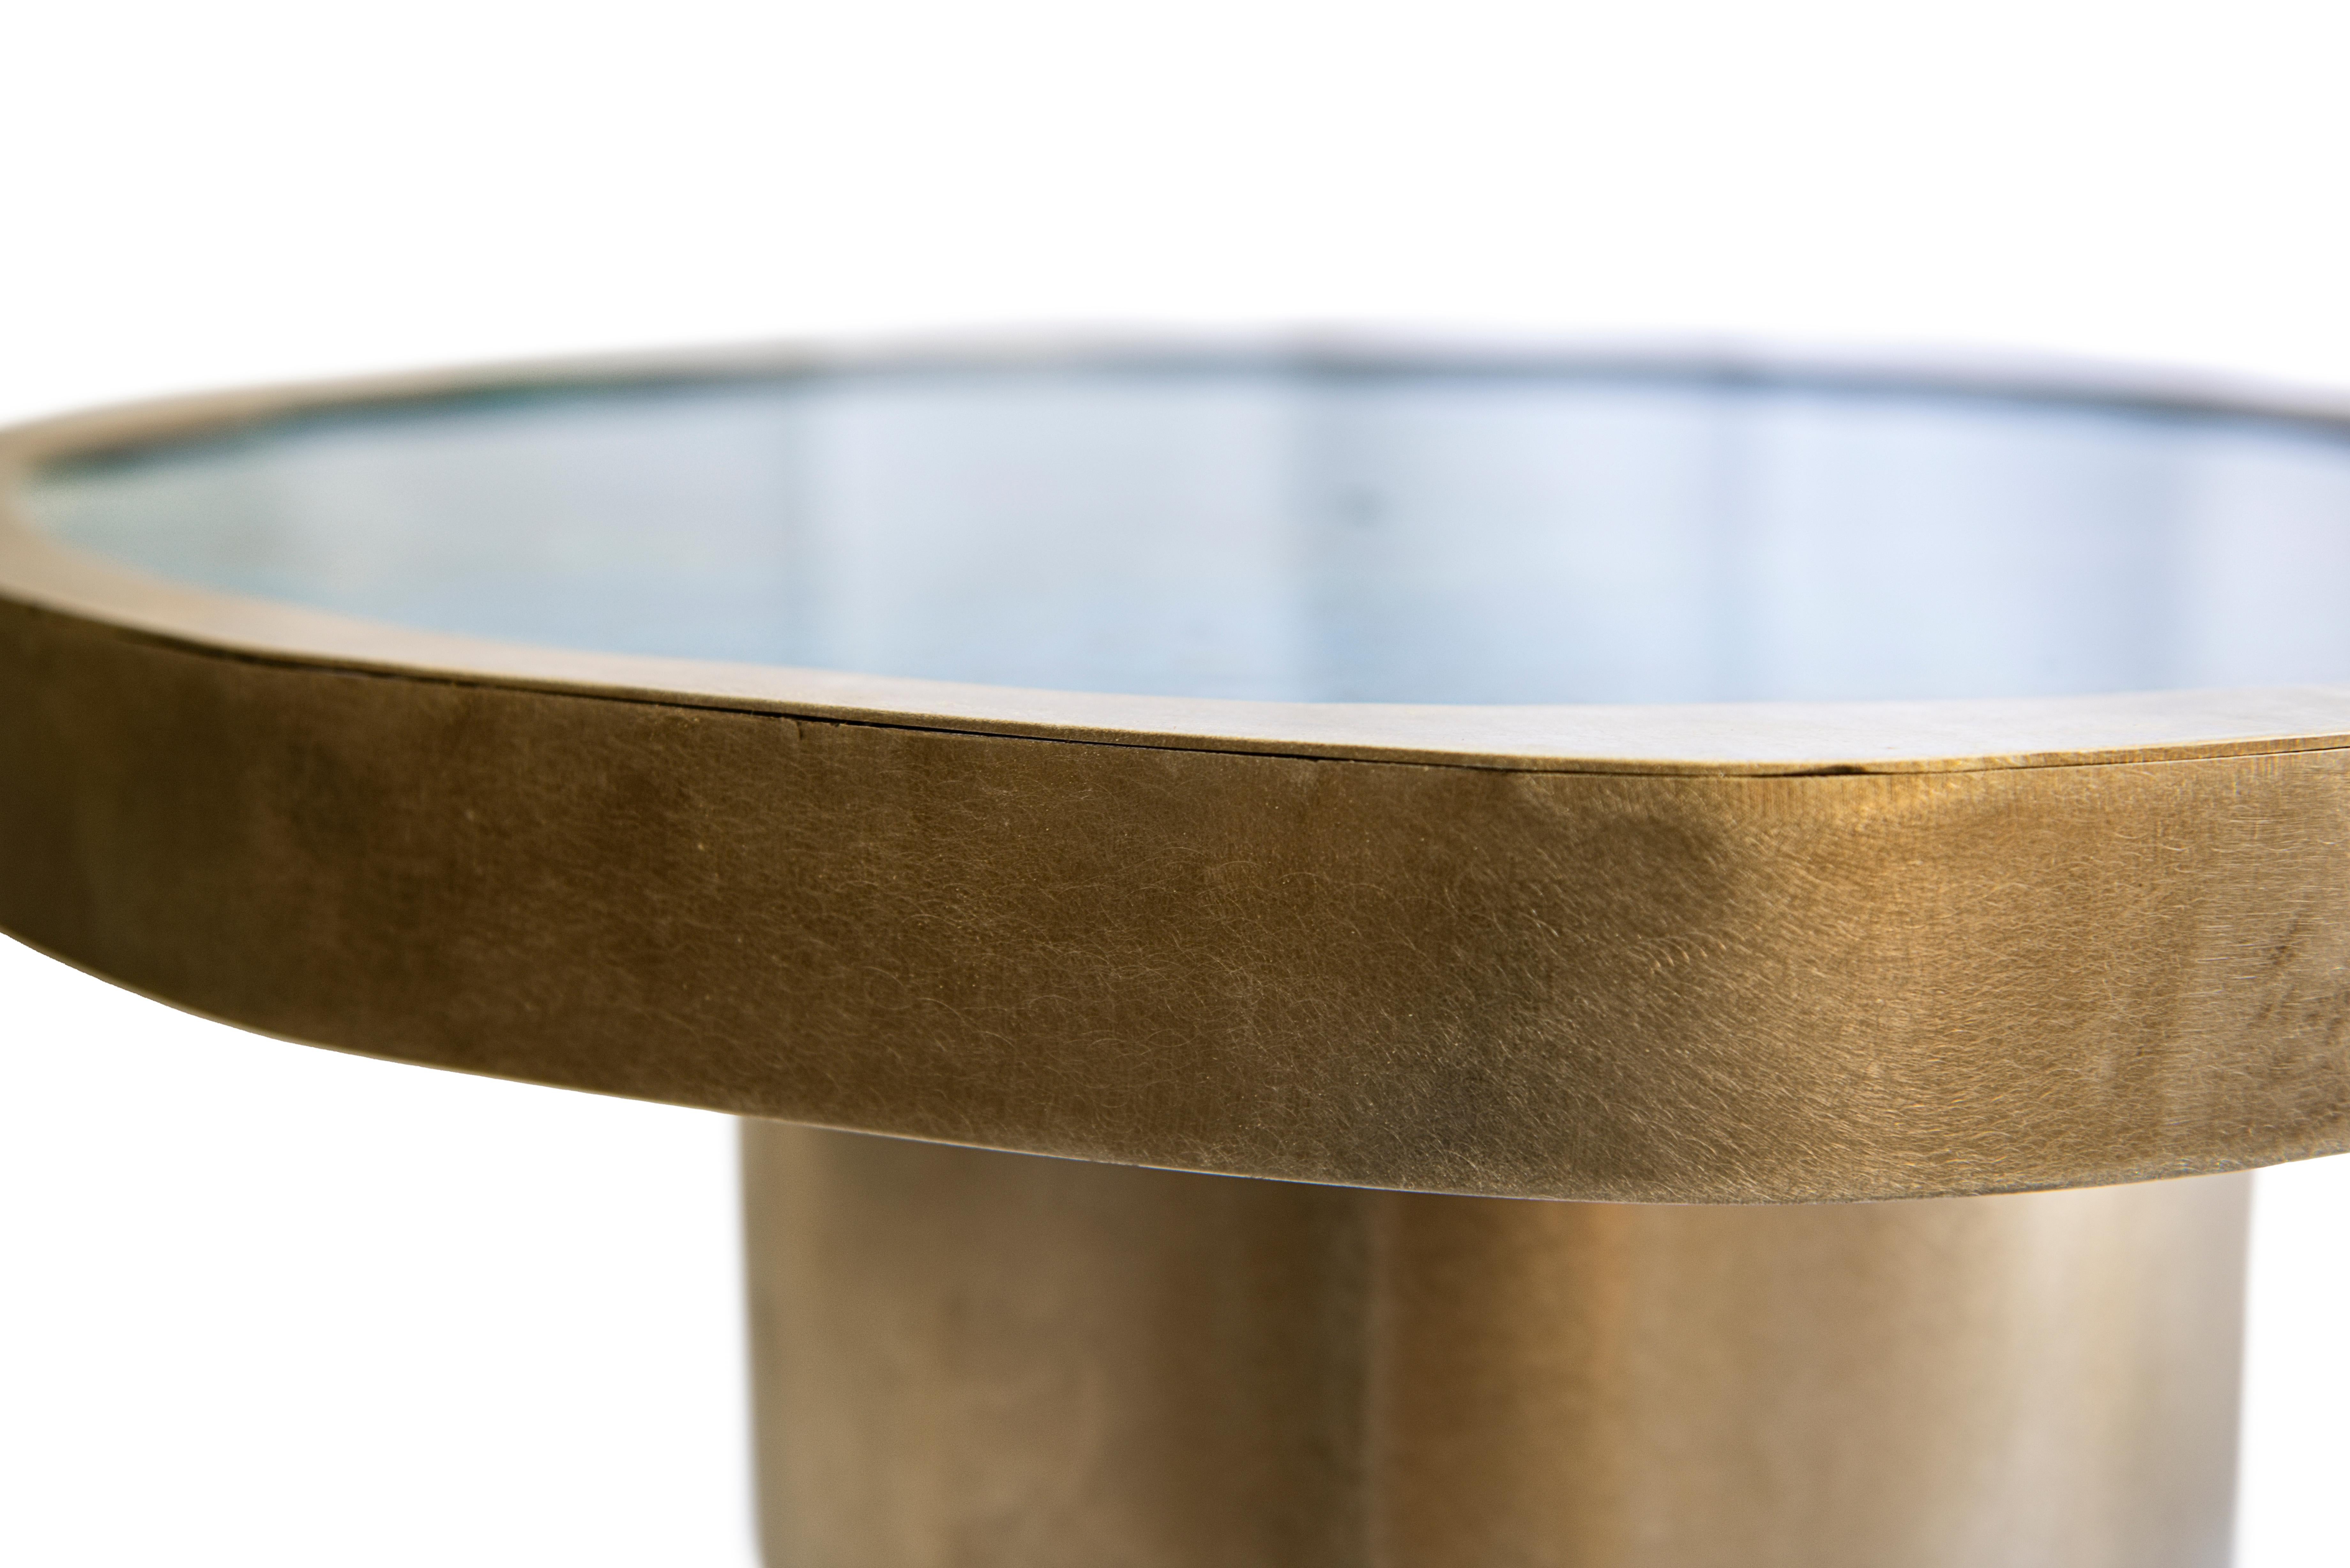 Ilune mare coffee table by Delvis Unlimited.
Dimensions: diameter 60 x height 50 cm.
Material: stainless steel, resin.
Finishes: flamed stainless steel, casting of metal, dark blue resin.

“Mare is born from a fusion of crystallized metal,